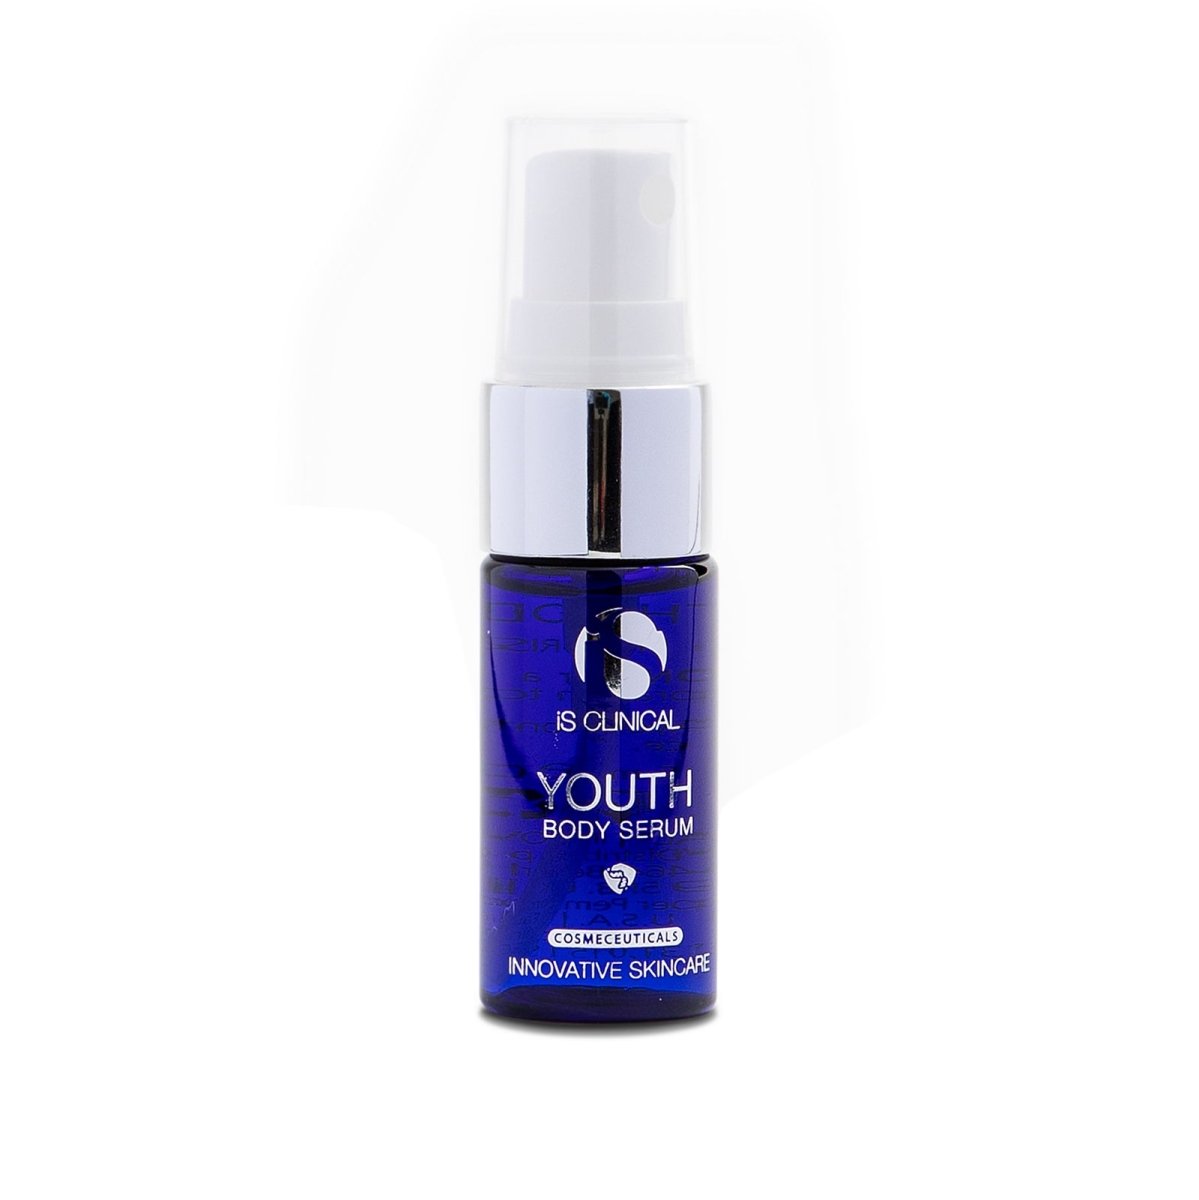 iS Clinical Youth Body Serum - SkincareEssentials